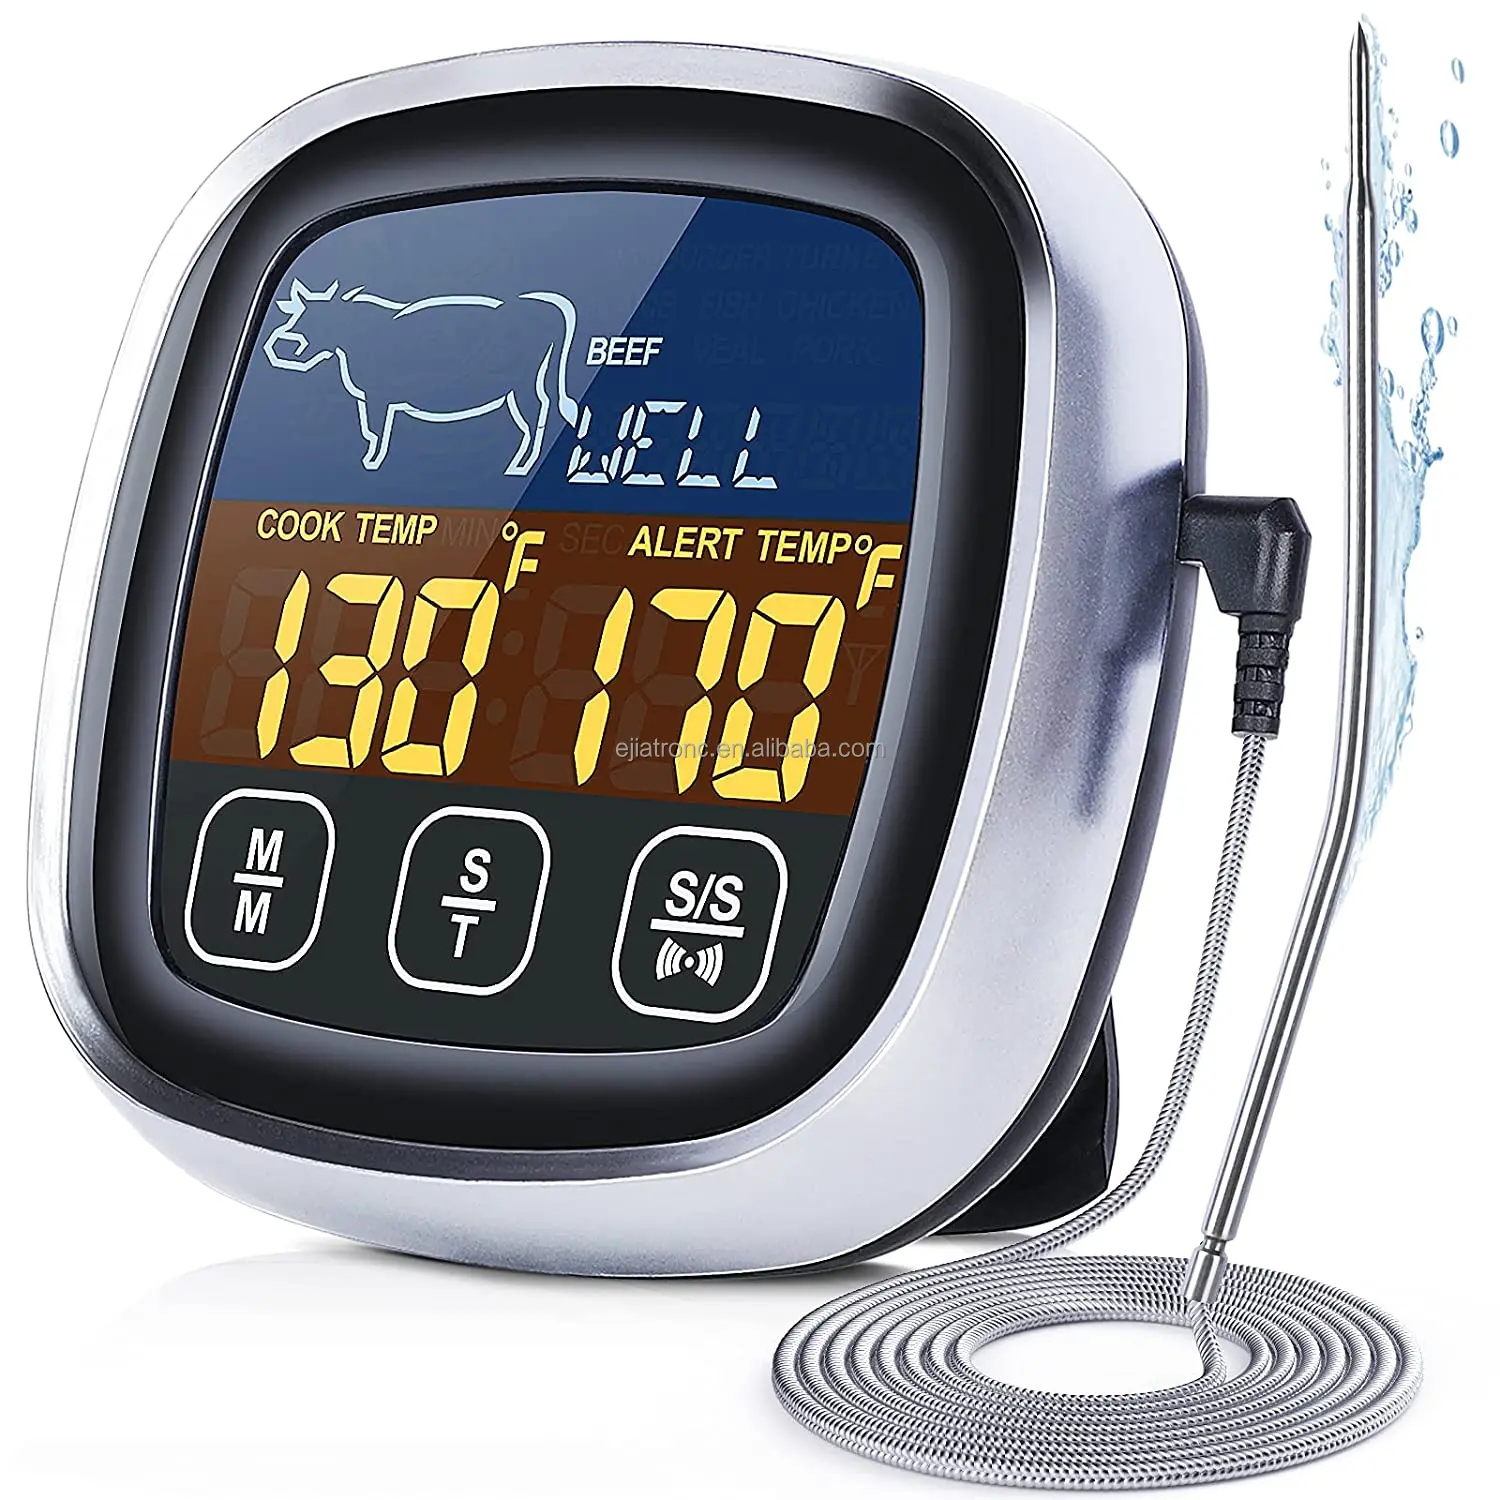 

2021 All-New Touchscreen Black LCD Digital Cooking Food Meat Smoker Oven Kitchen BBQ Grill Thermometer with alarm Clock Timer